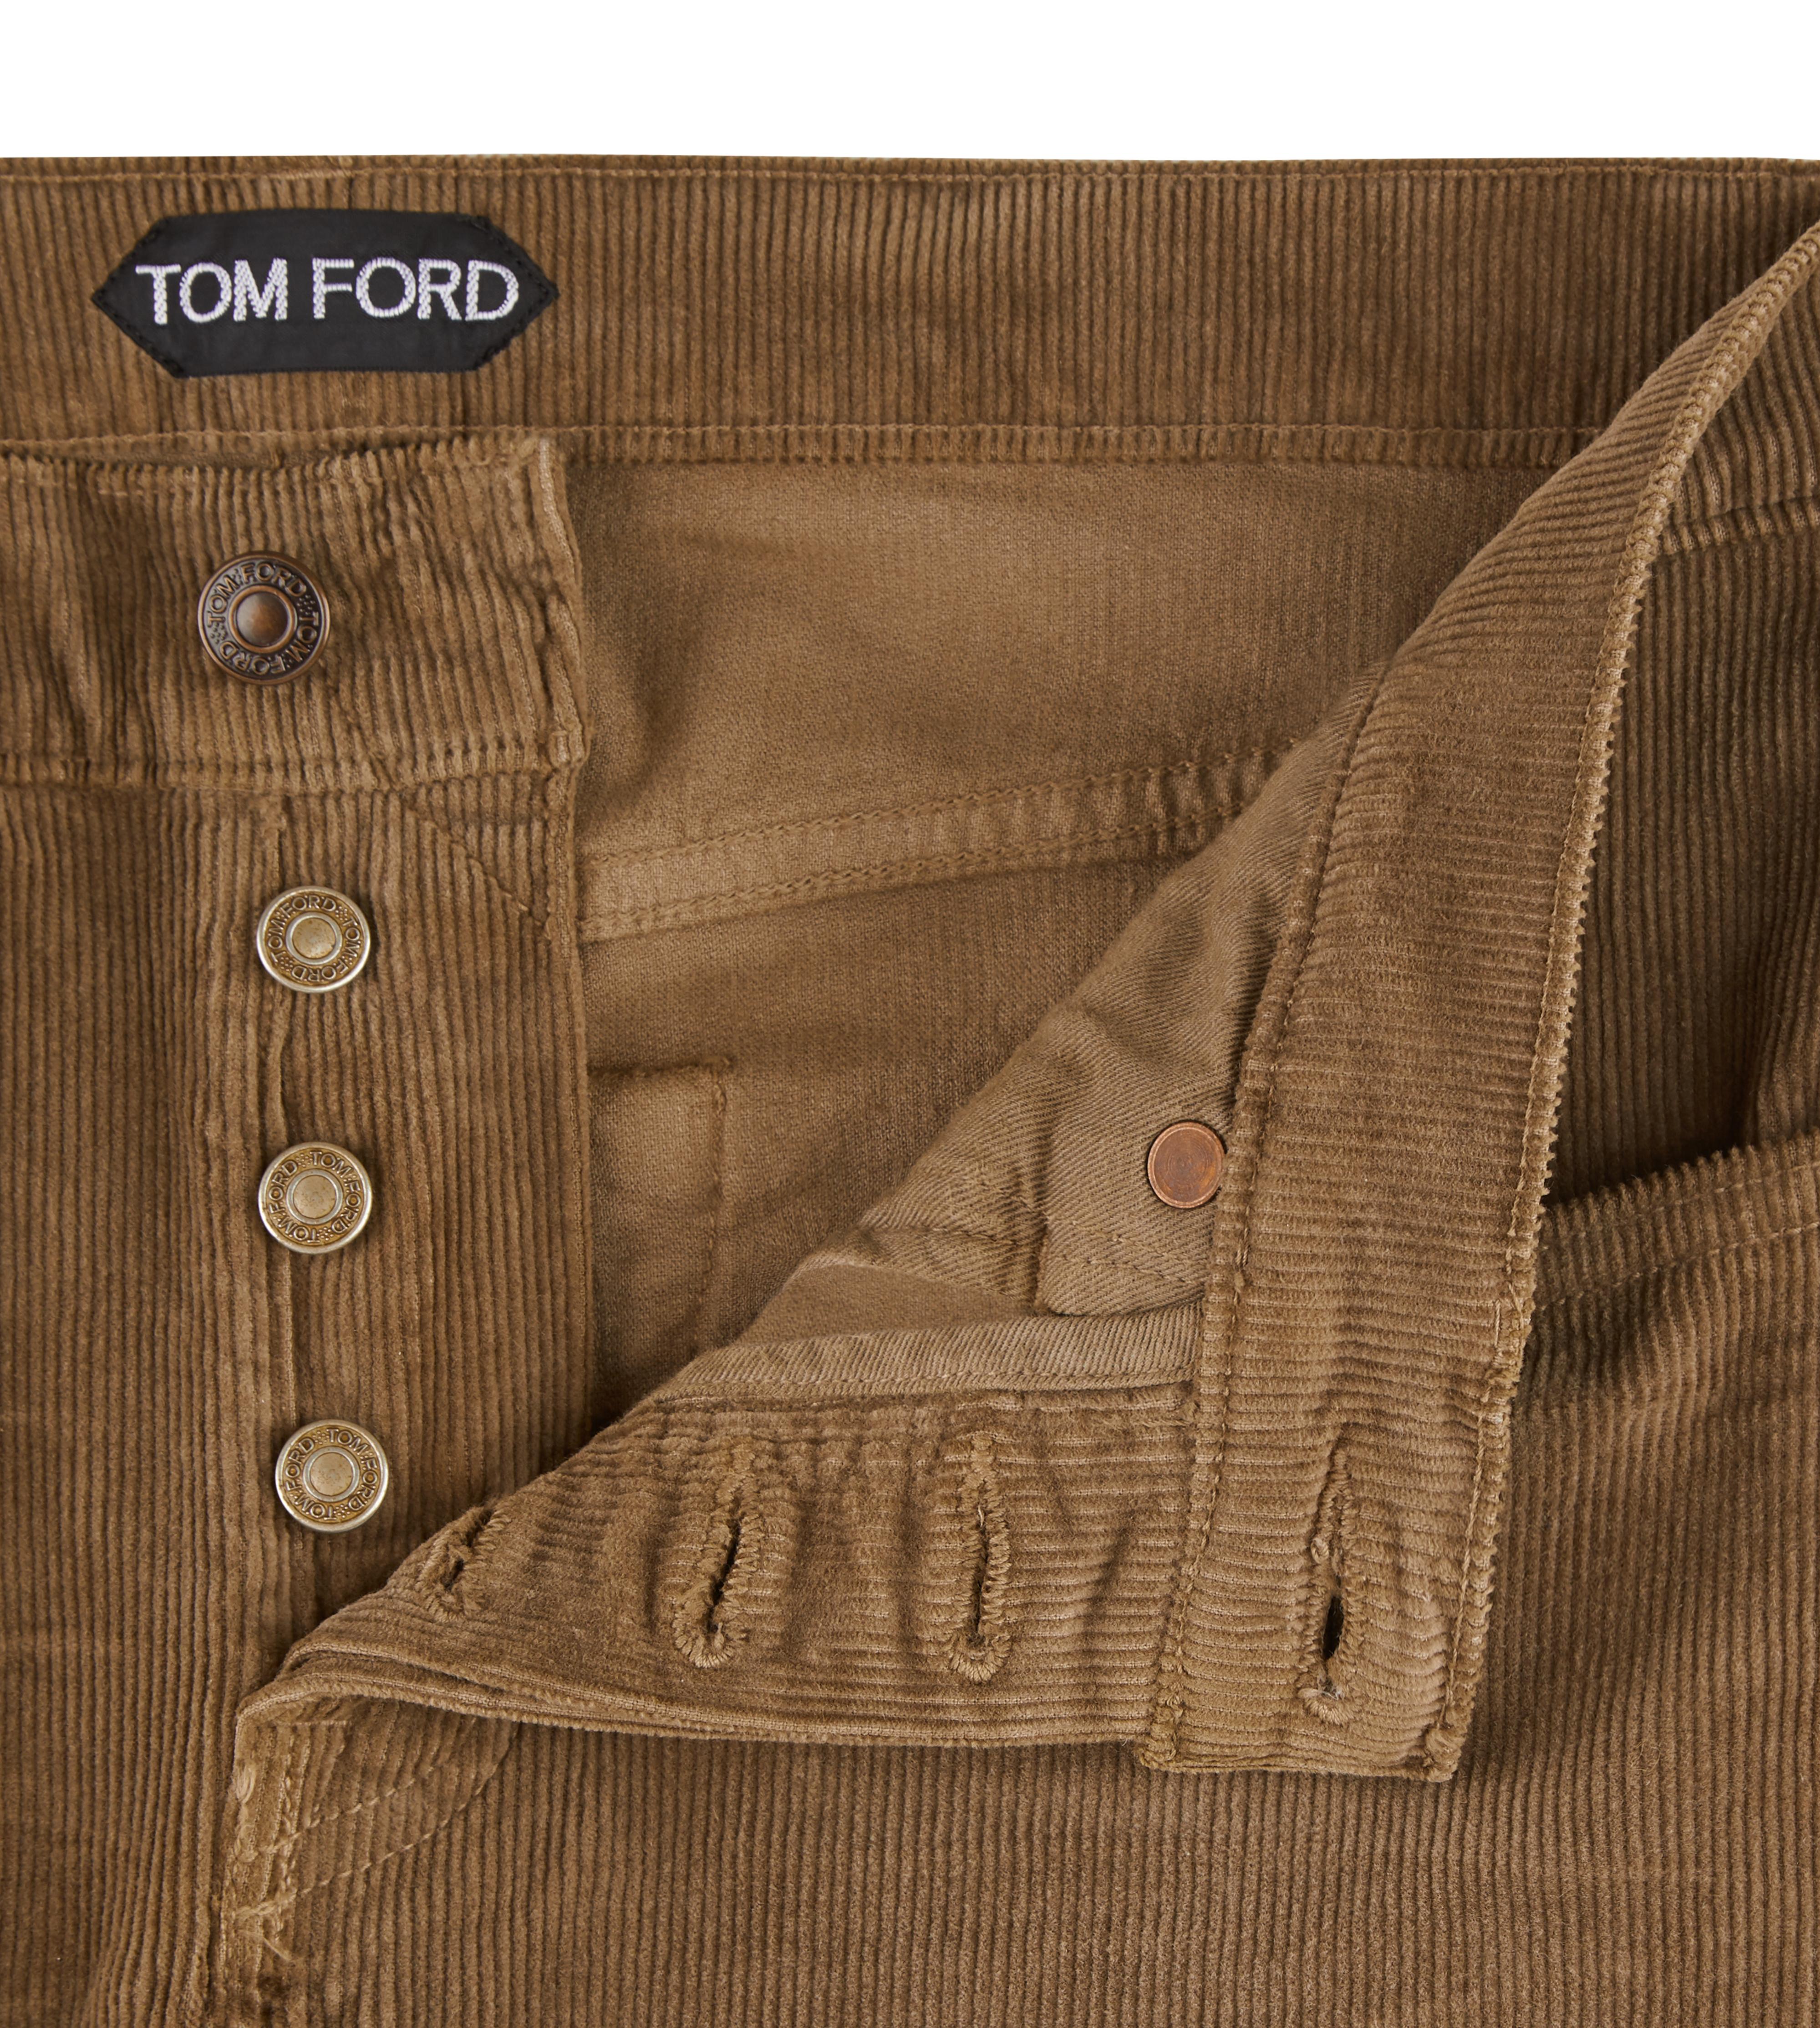 Tom Ford SLIM FIT STRETCH WASHED CORDUROY JEANS 